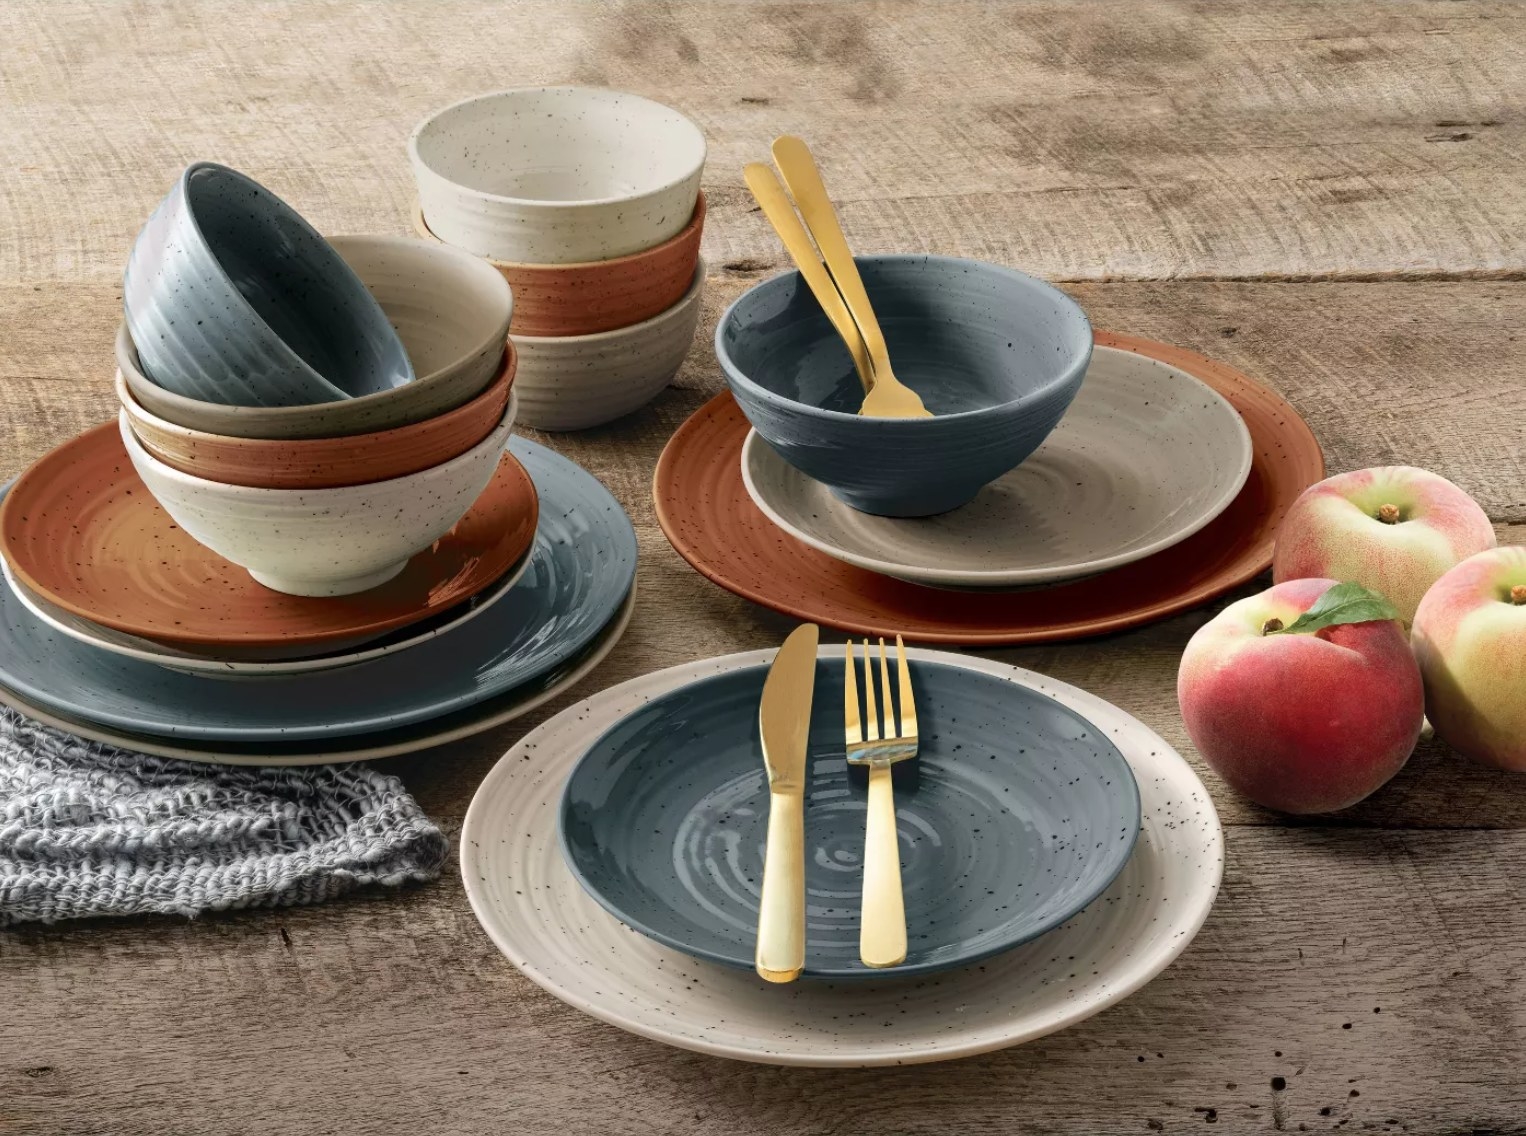 the full set of dinnerware in different colors, cream, blue, orange, and tan all stacked together with gold knives and forks on top and three apples on the side